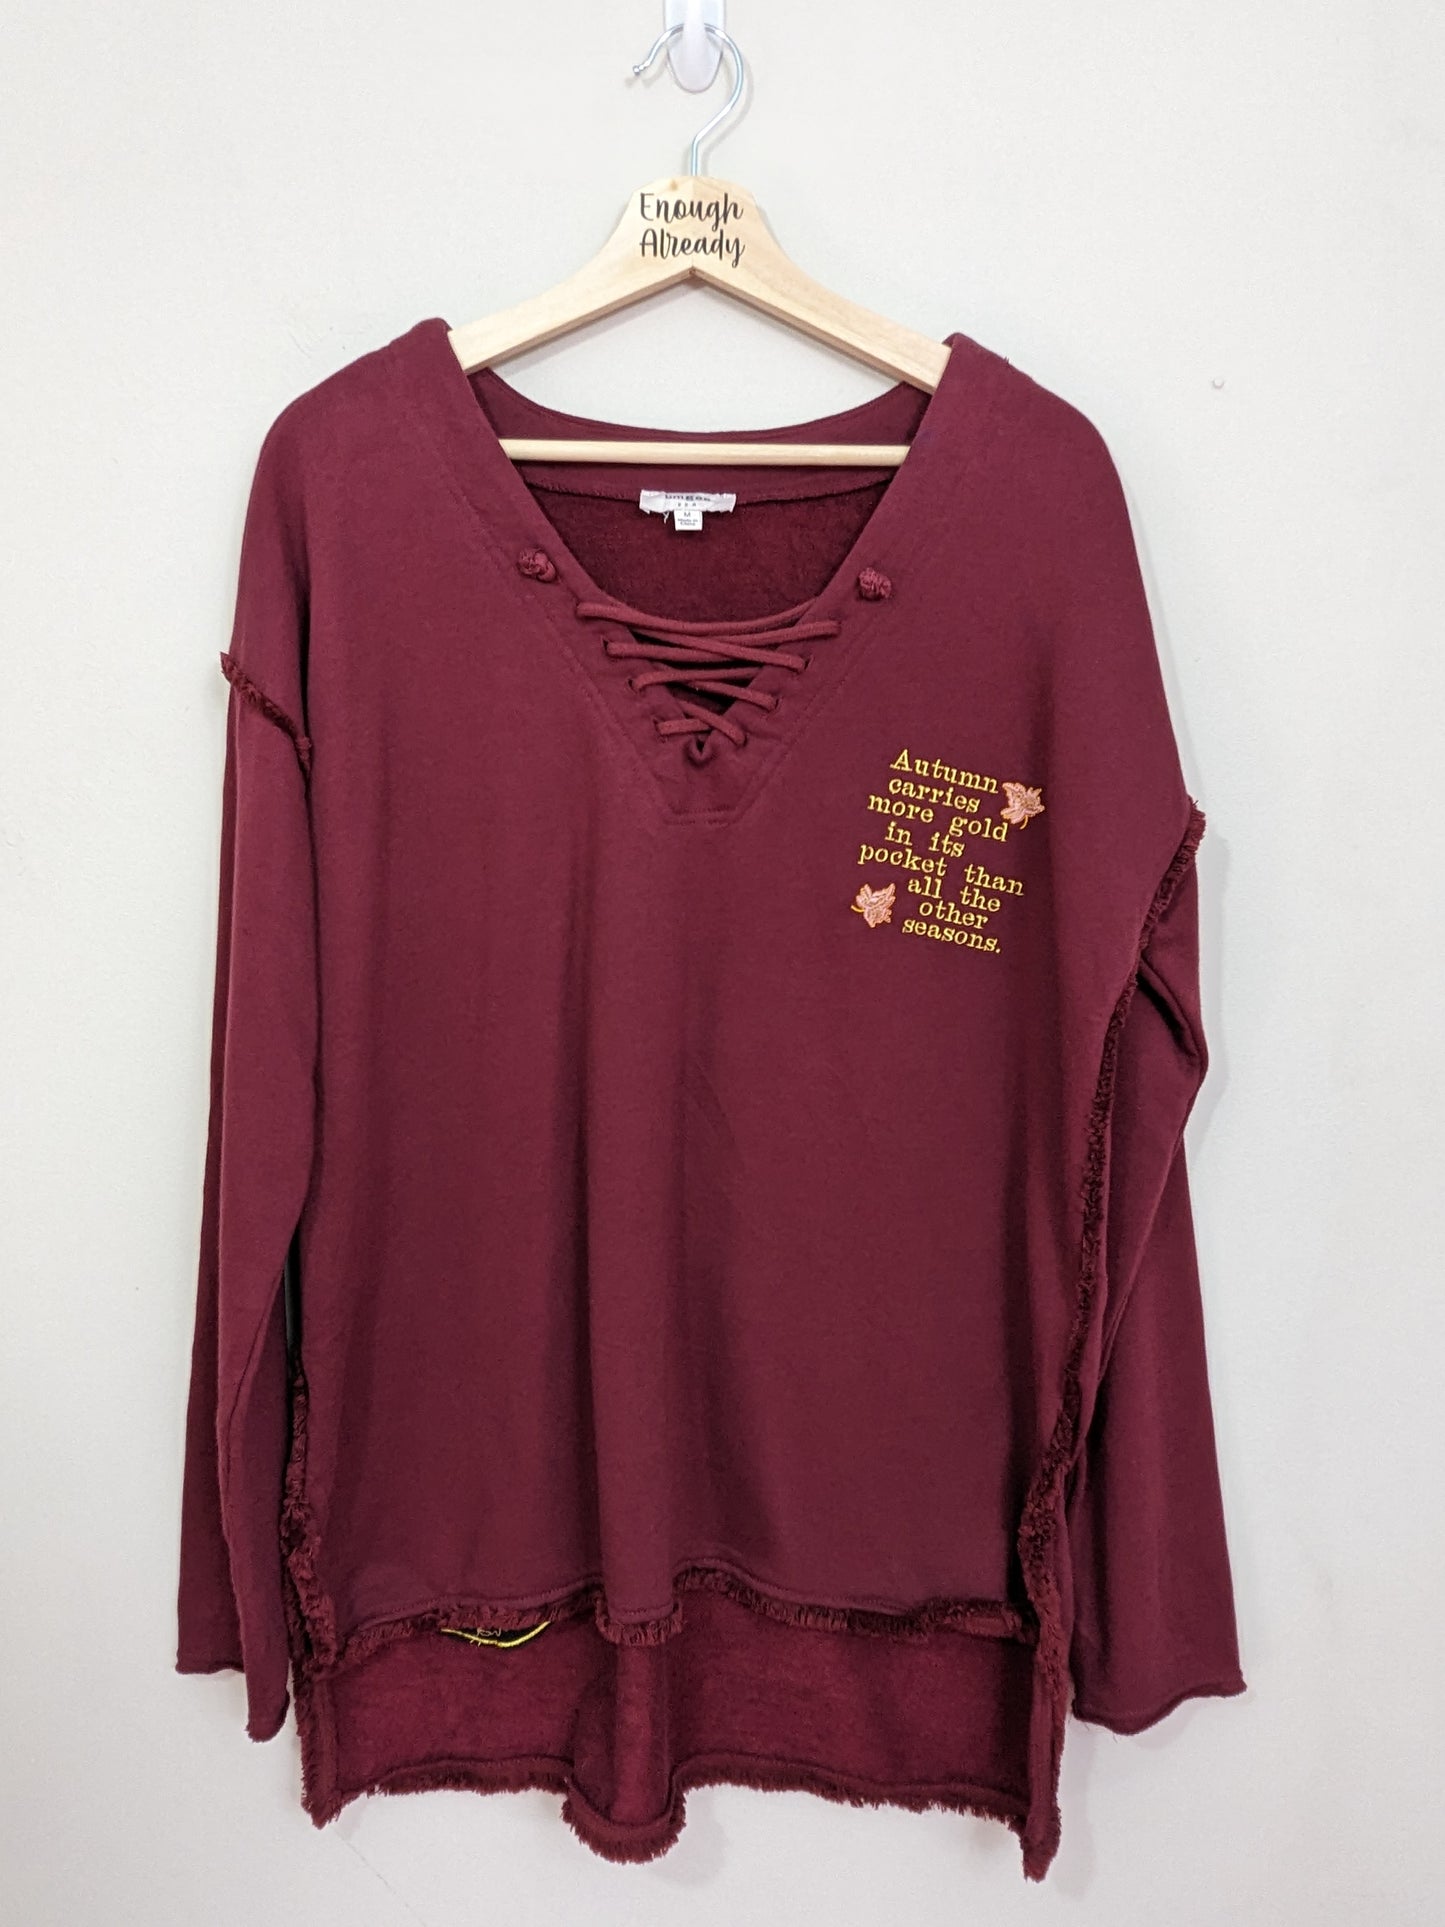 Size Women's Medium Reworked Burgundy Longline Tunic with Embroidered Autumnal Bookish Quote